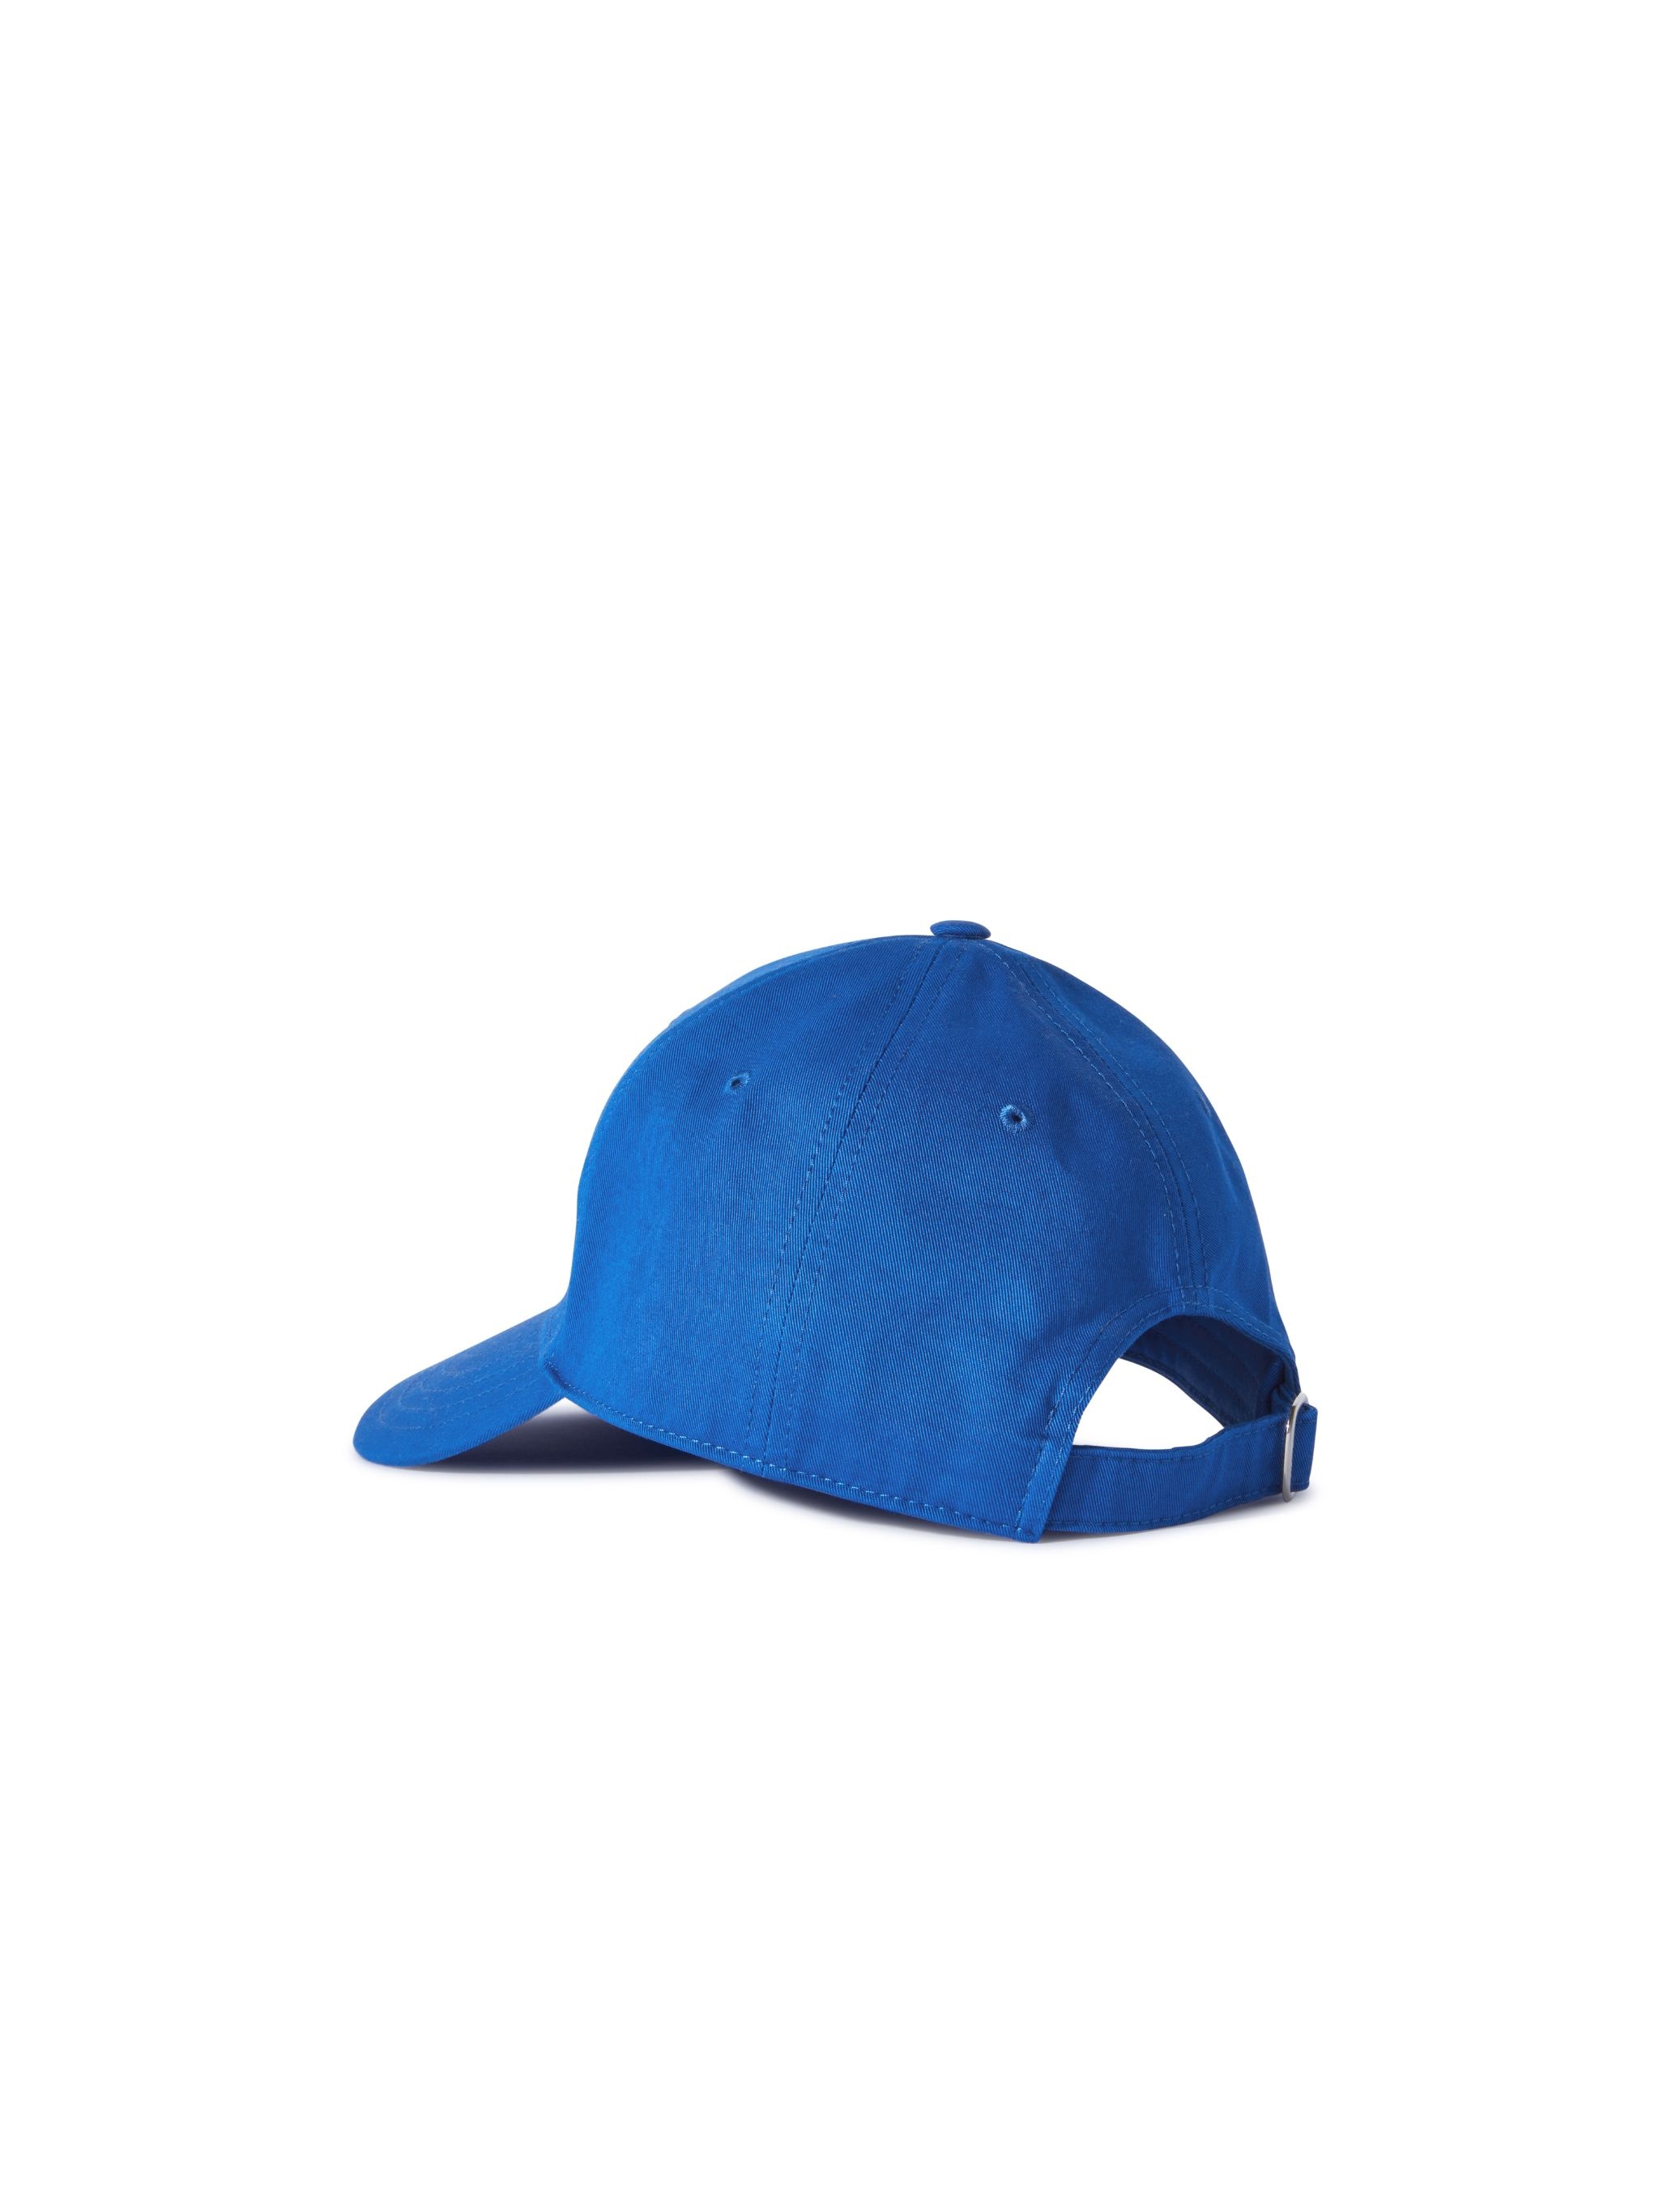 Drill No Offence Baseball Cap Blue White - 2